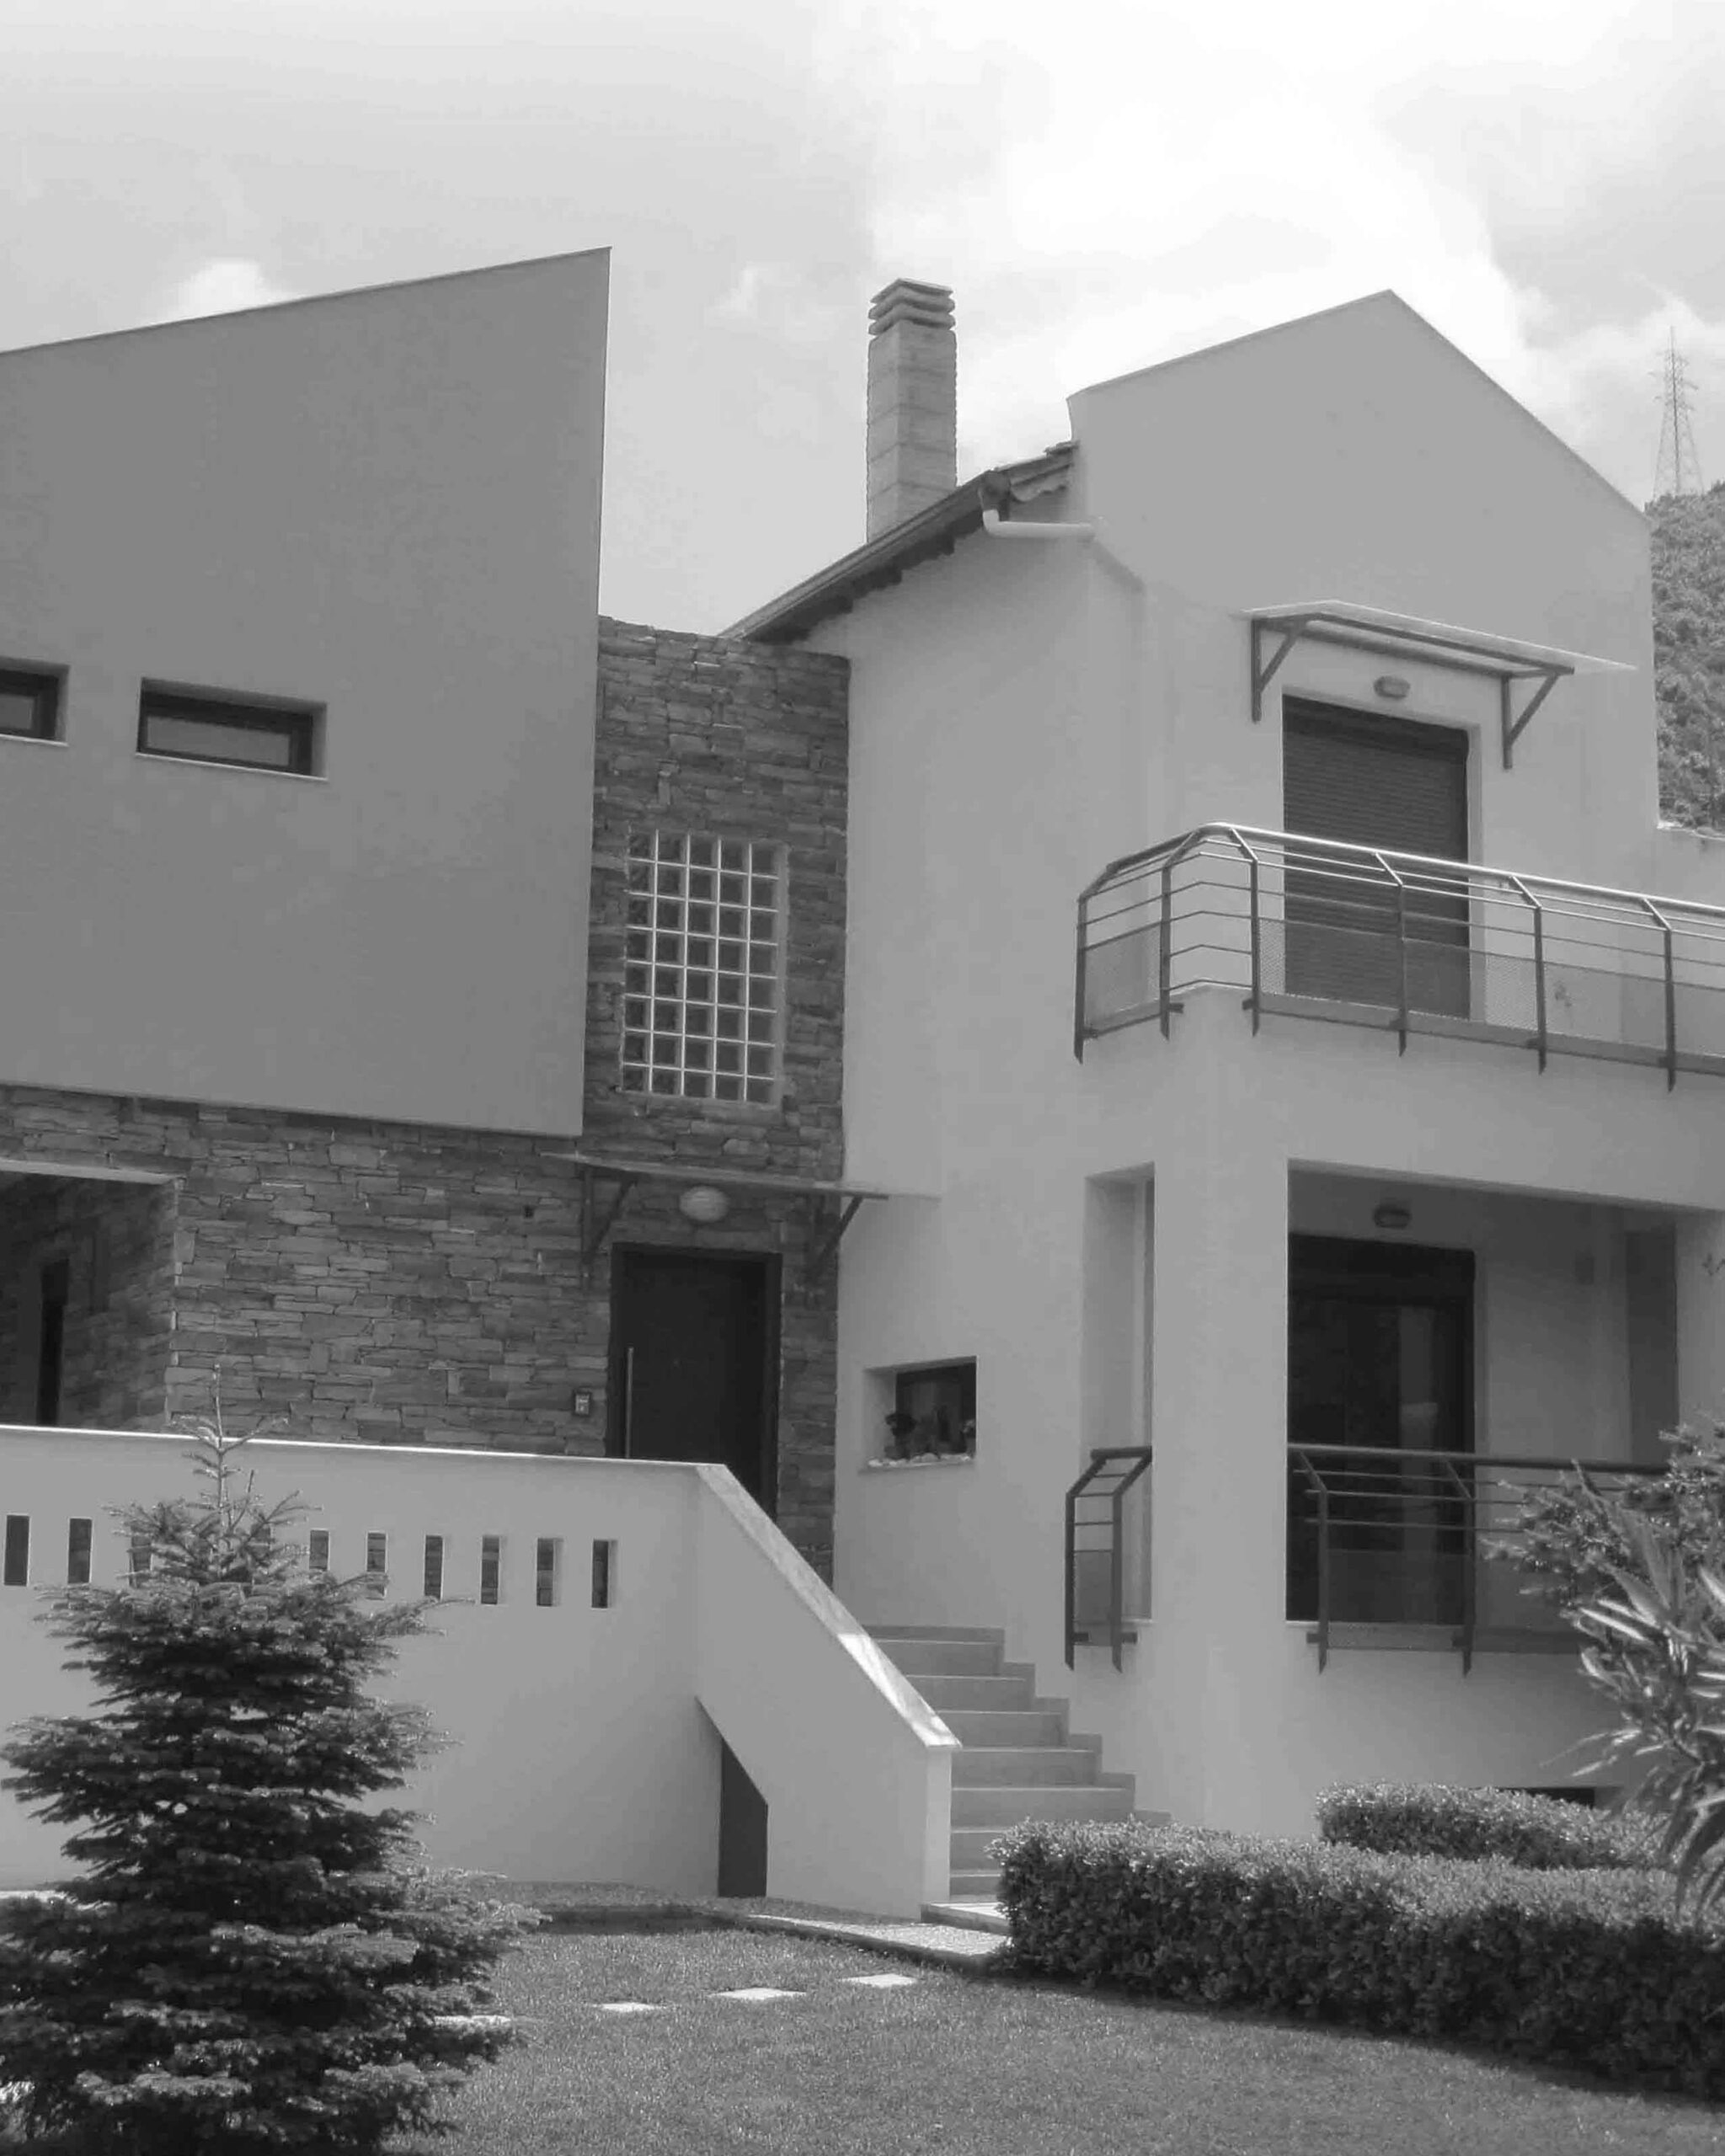 Detached house in Ano Stavros (Thessaloniki, 2004)